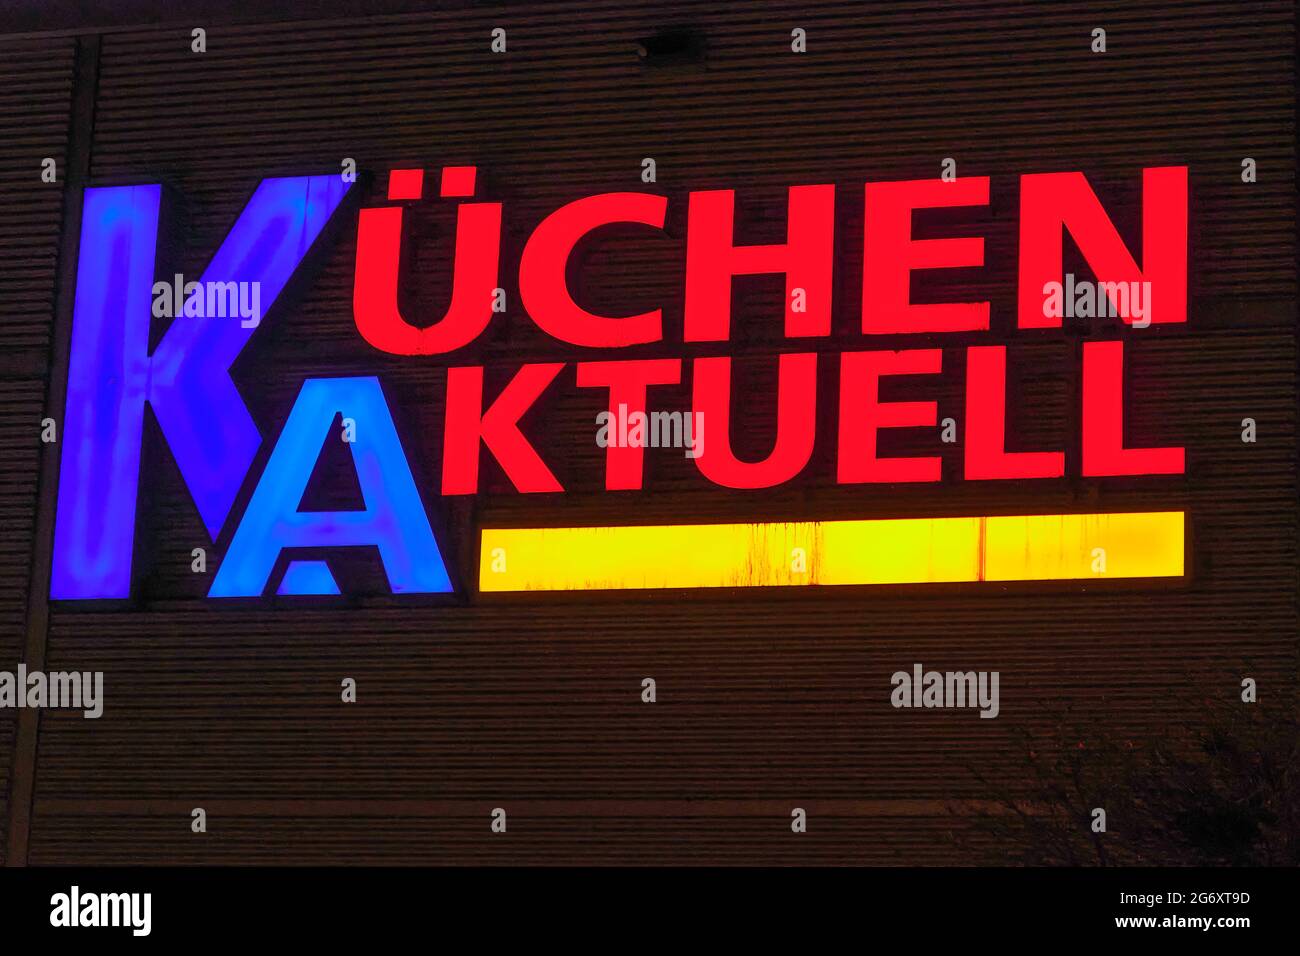 Berlin, Germany - December 22, 2020: Facade of a kitchen studio with neon advertising in the evening. Stock Photo